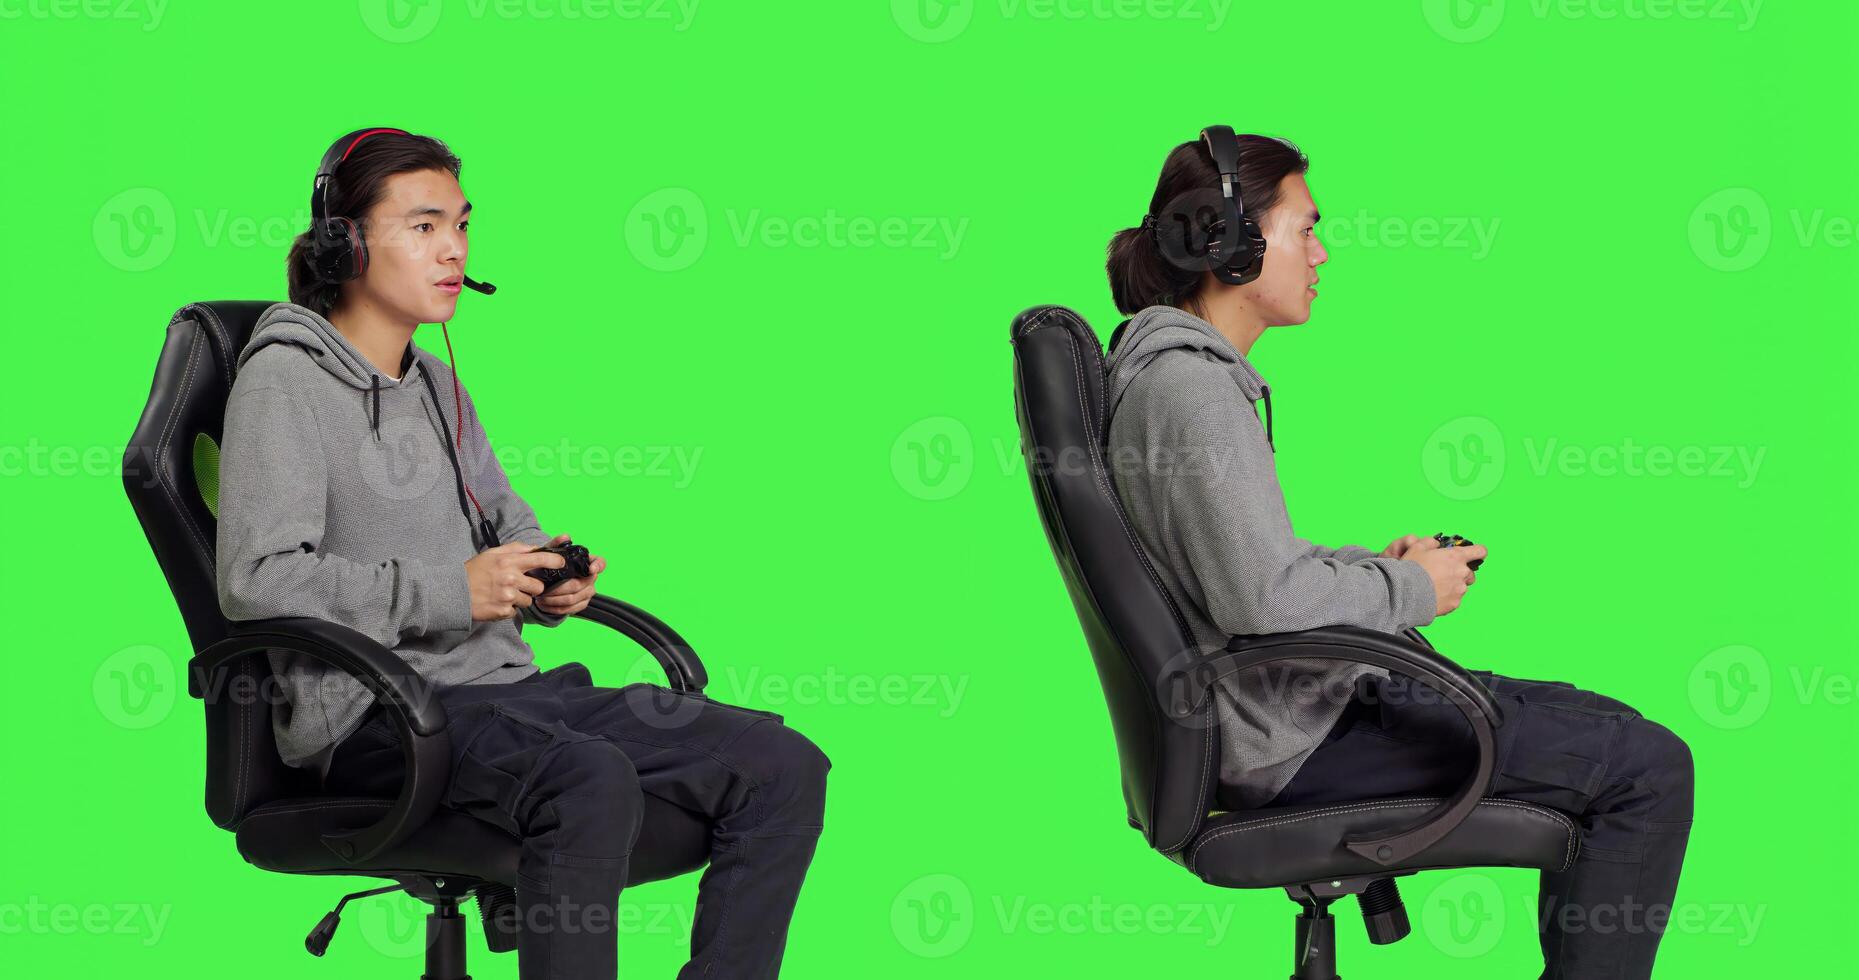 Gamer having fun with rpg challenge over greenscreen background, playing videogames with controller. Young asian guy enjoying online gaming, video game player with coordination skill. photo